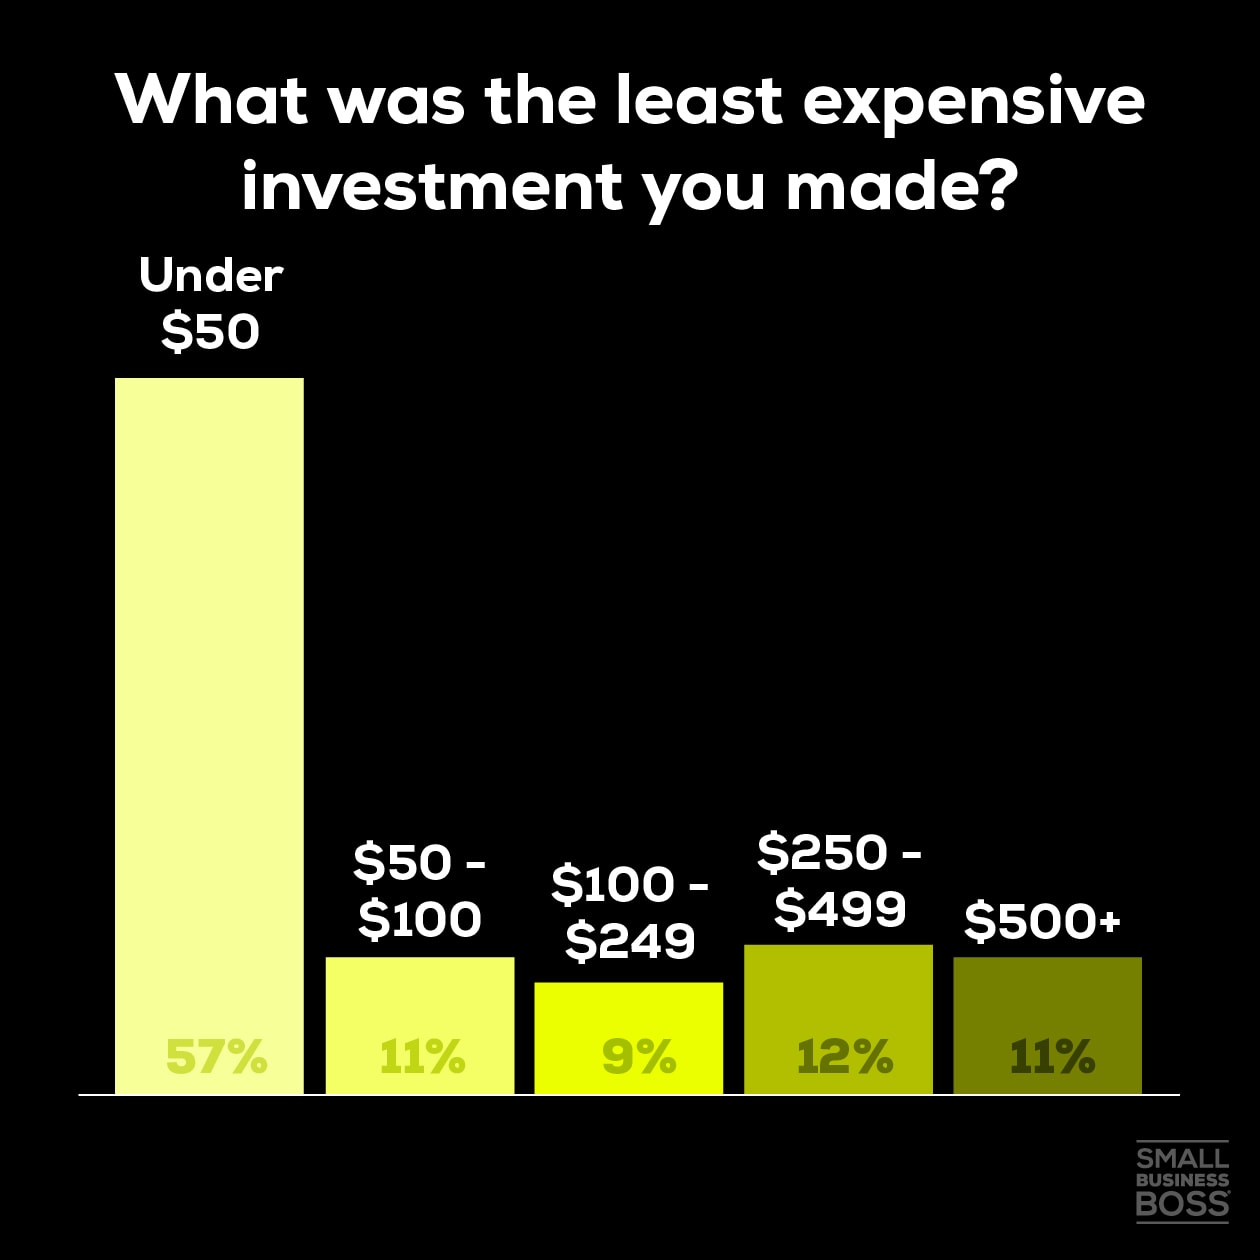 Least expensive investment